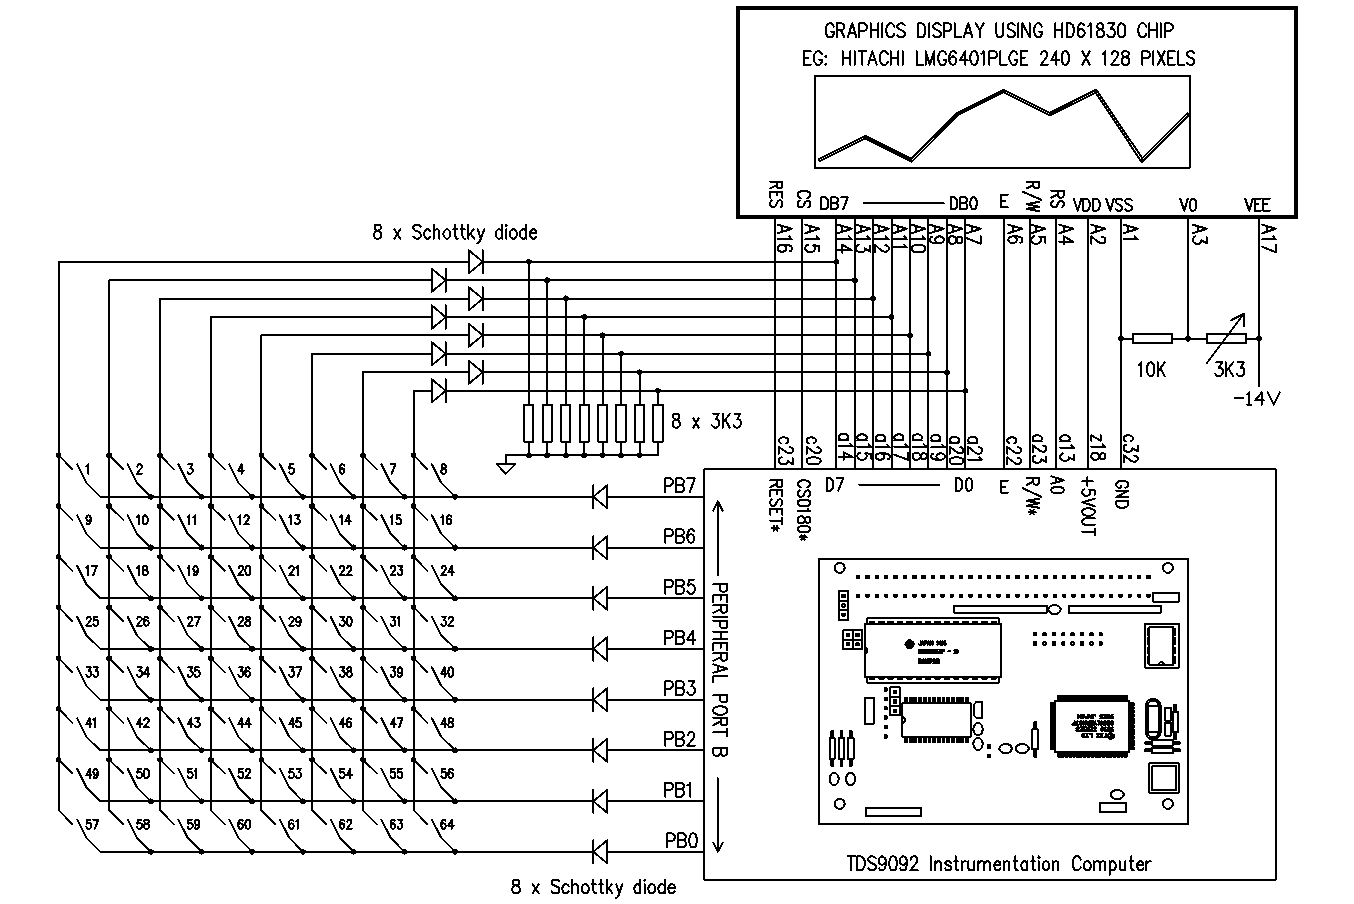 Graphic LCD connections to TDS9092